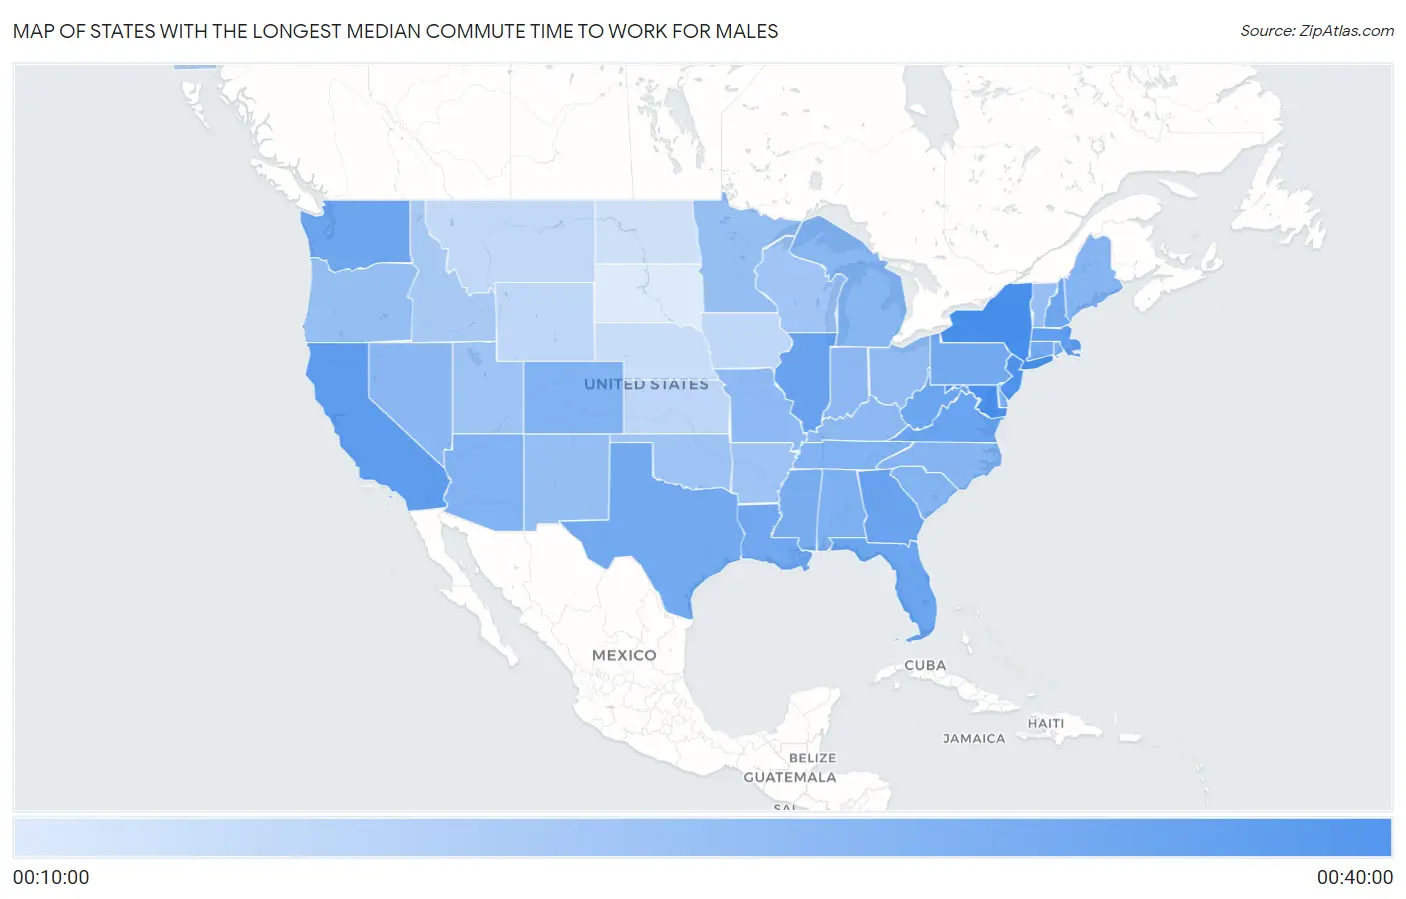 States with the Longest Median Commute Time to Work for Males in the United States Map